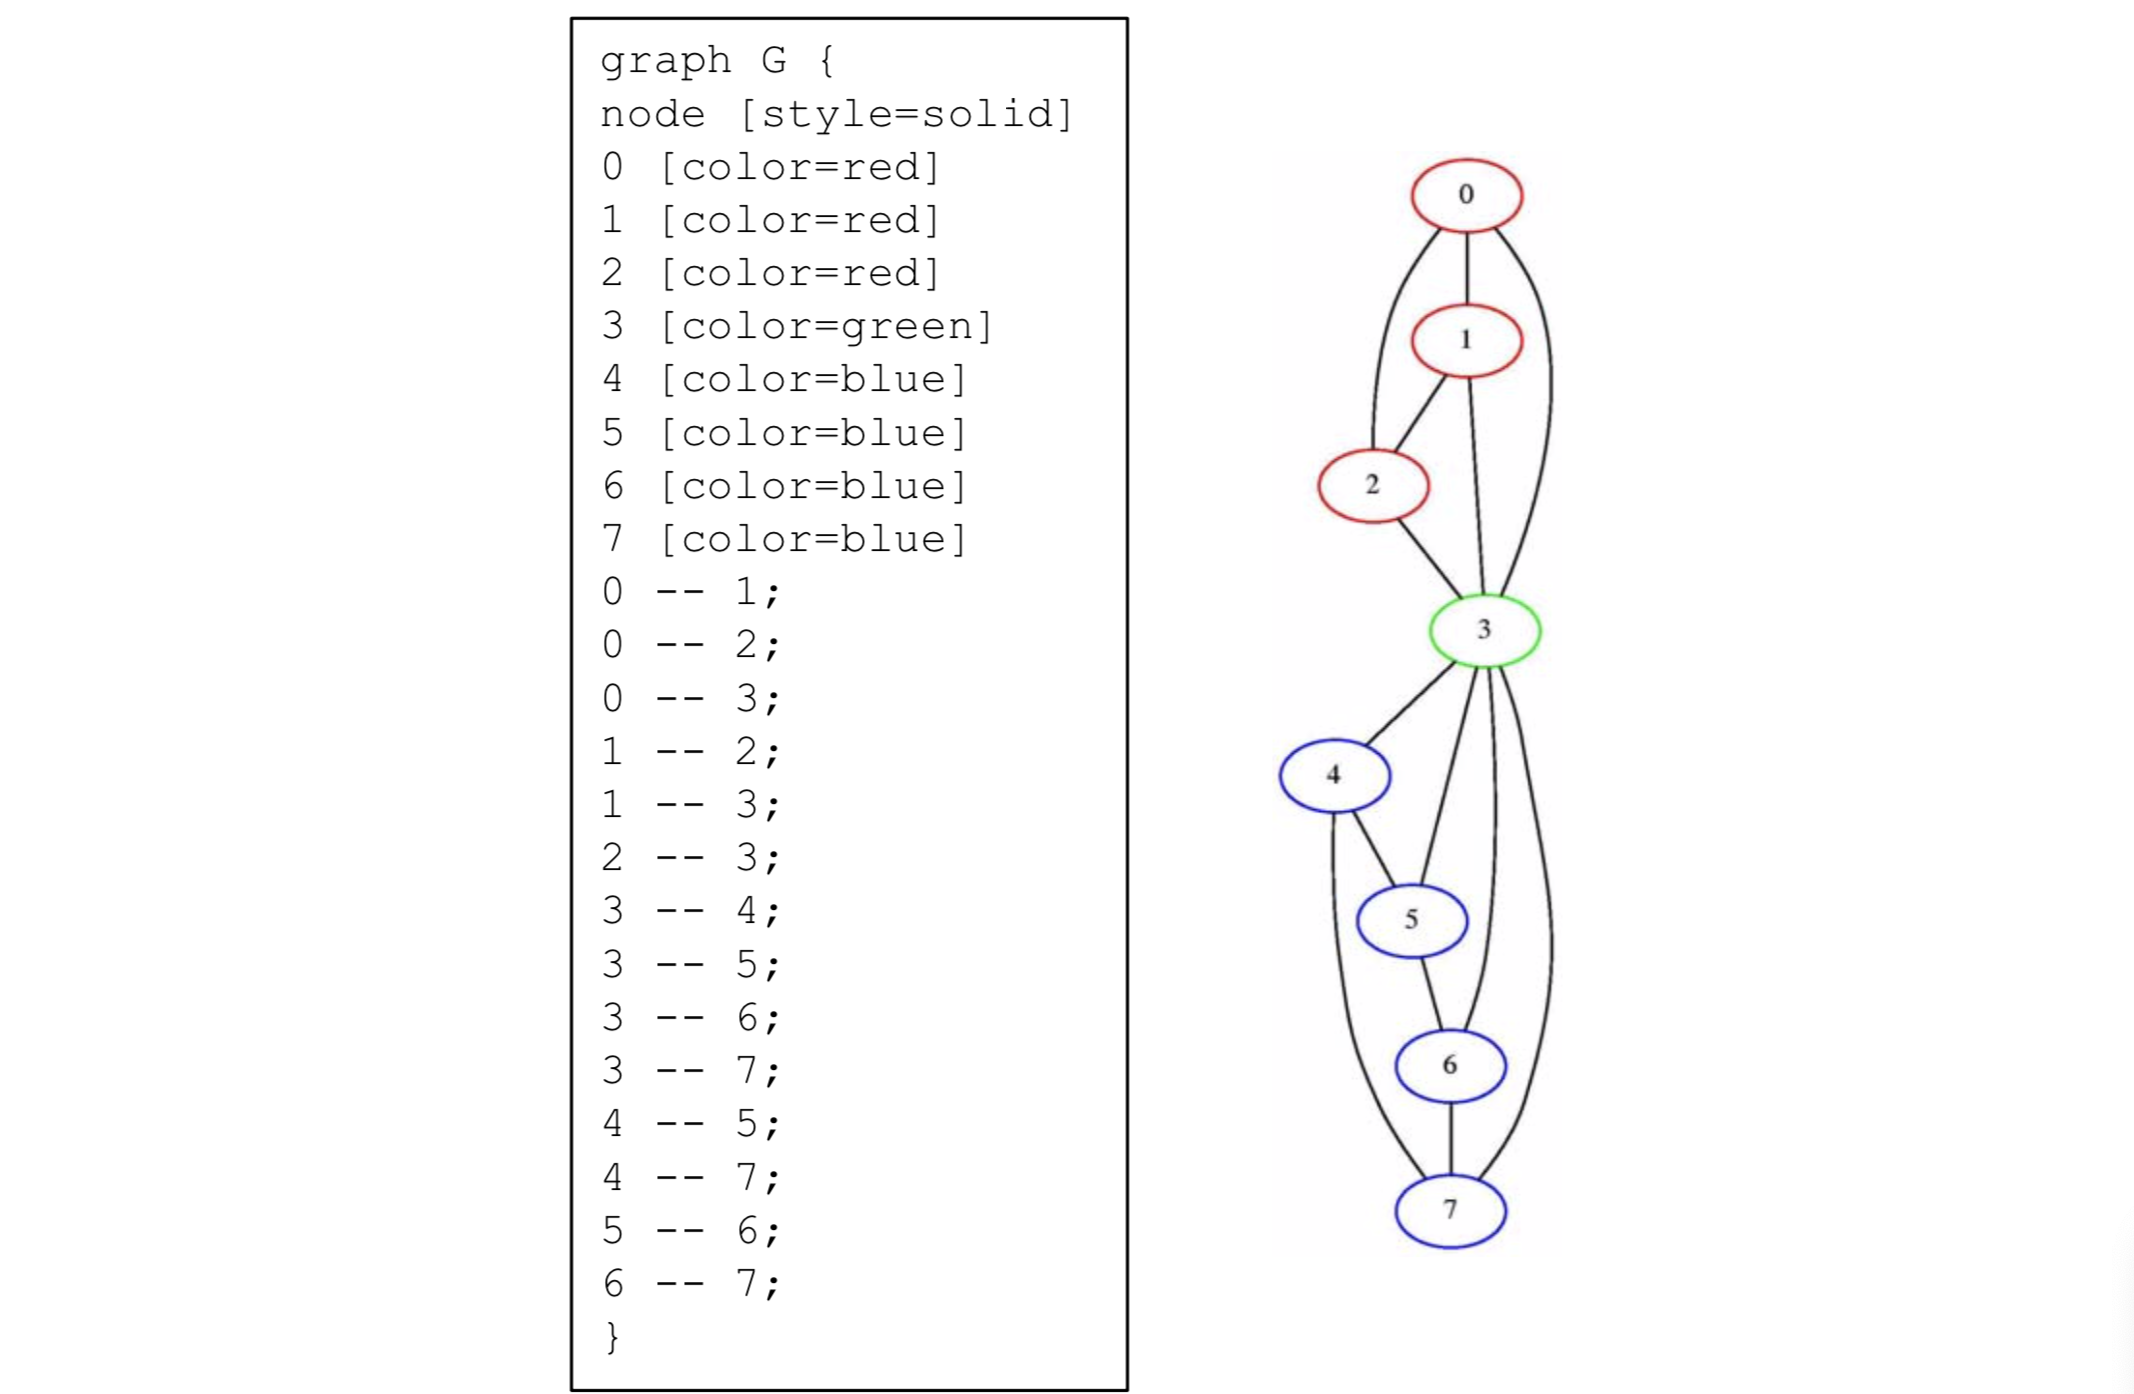 Graphviz input and output for the graph of Figure